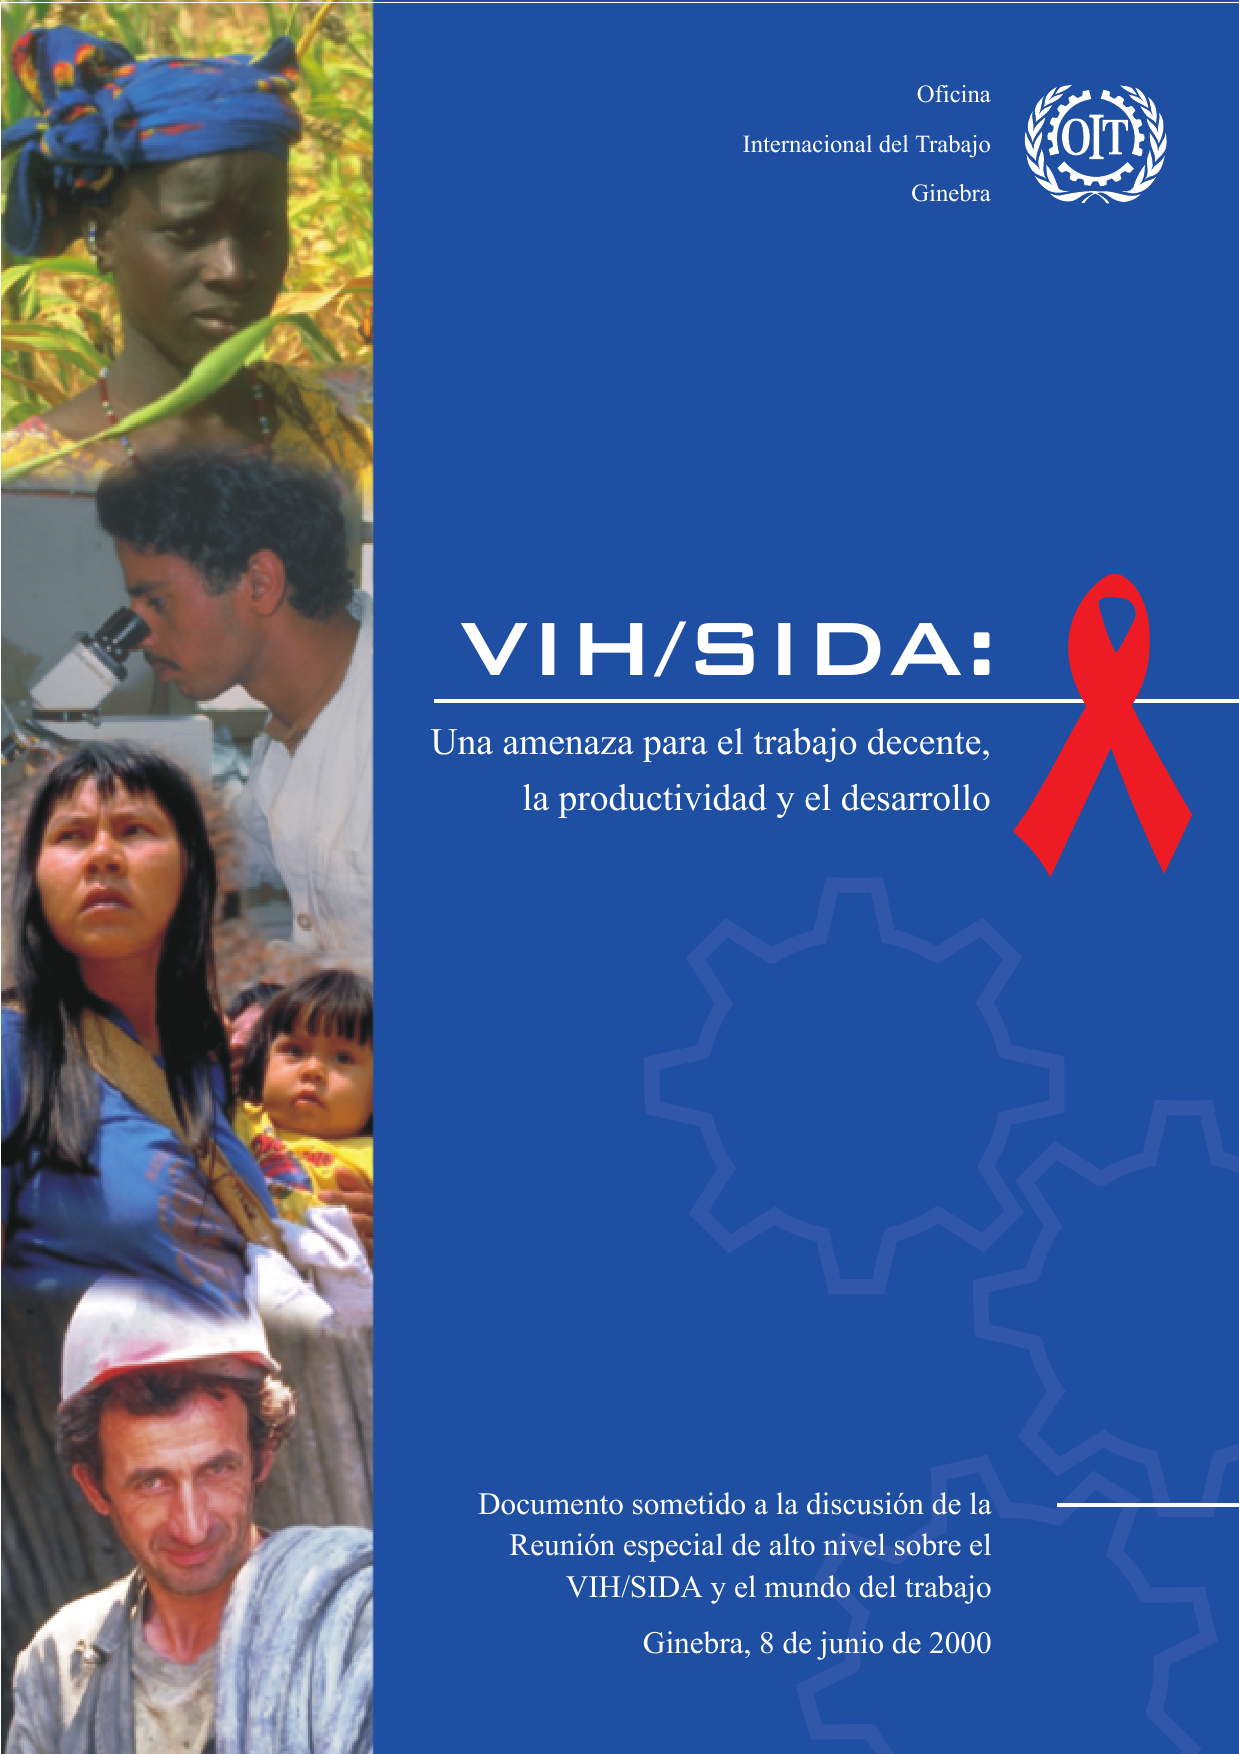 HIV/AIDS : a threat to decent work, productivity, and development : document for discussion at the Special High-level Meeting on HIV/AIDS and the World of Work, Geneva, 8 June 2000.